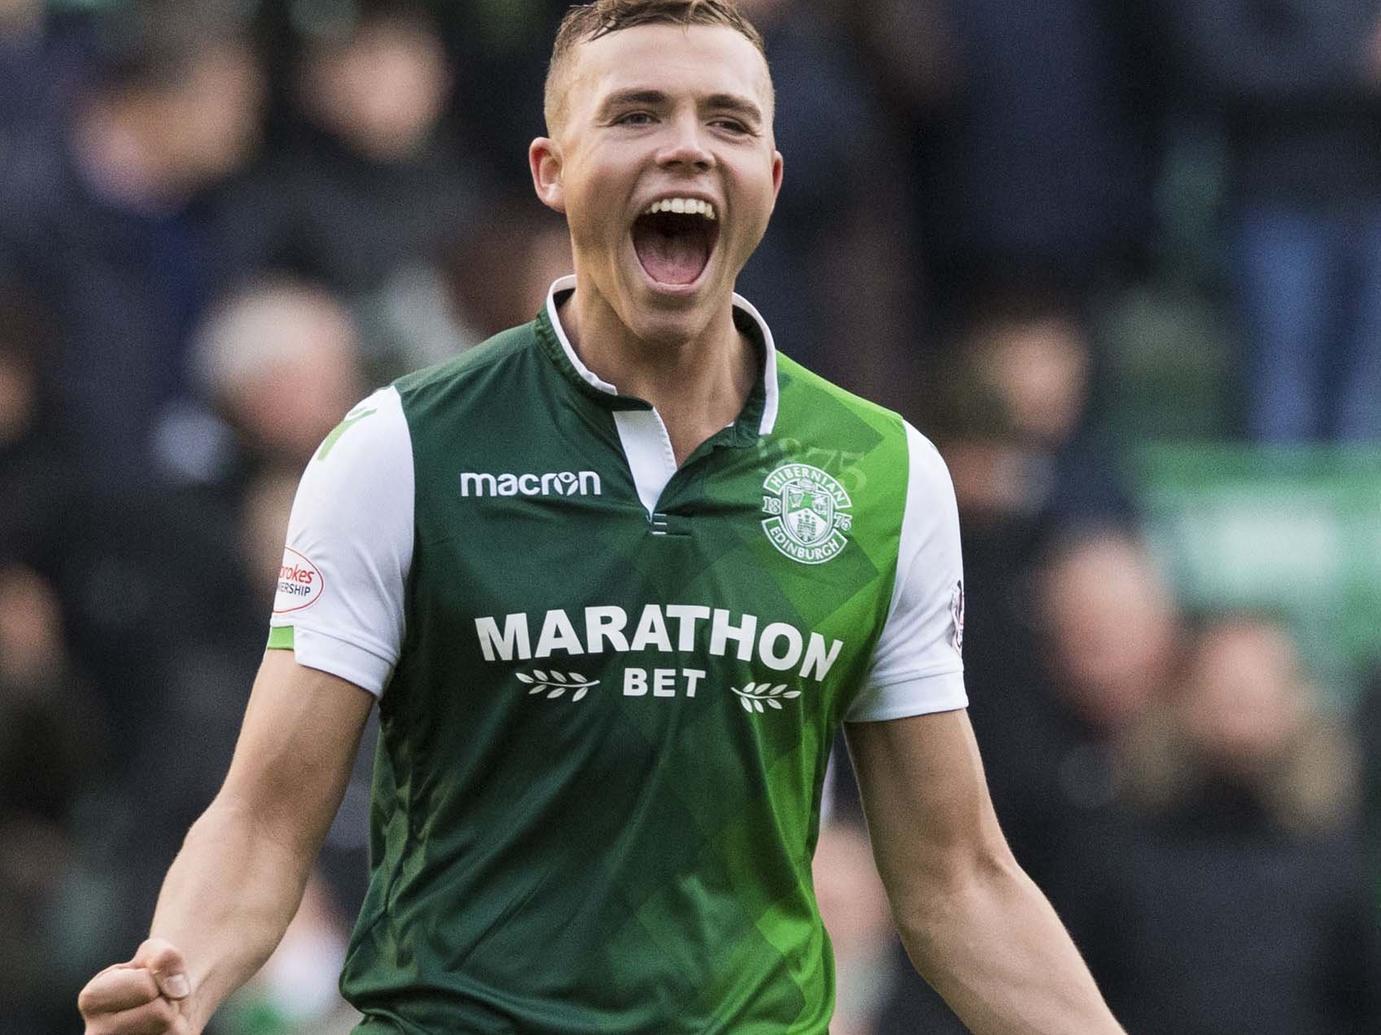 The 20 year old Hibs defender has bounced back from a serious knee injury to reclaim his place in the team, and in the Scotland squad.